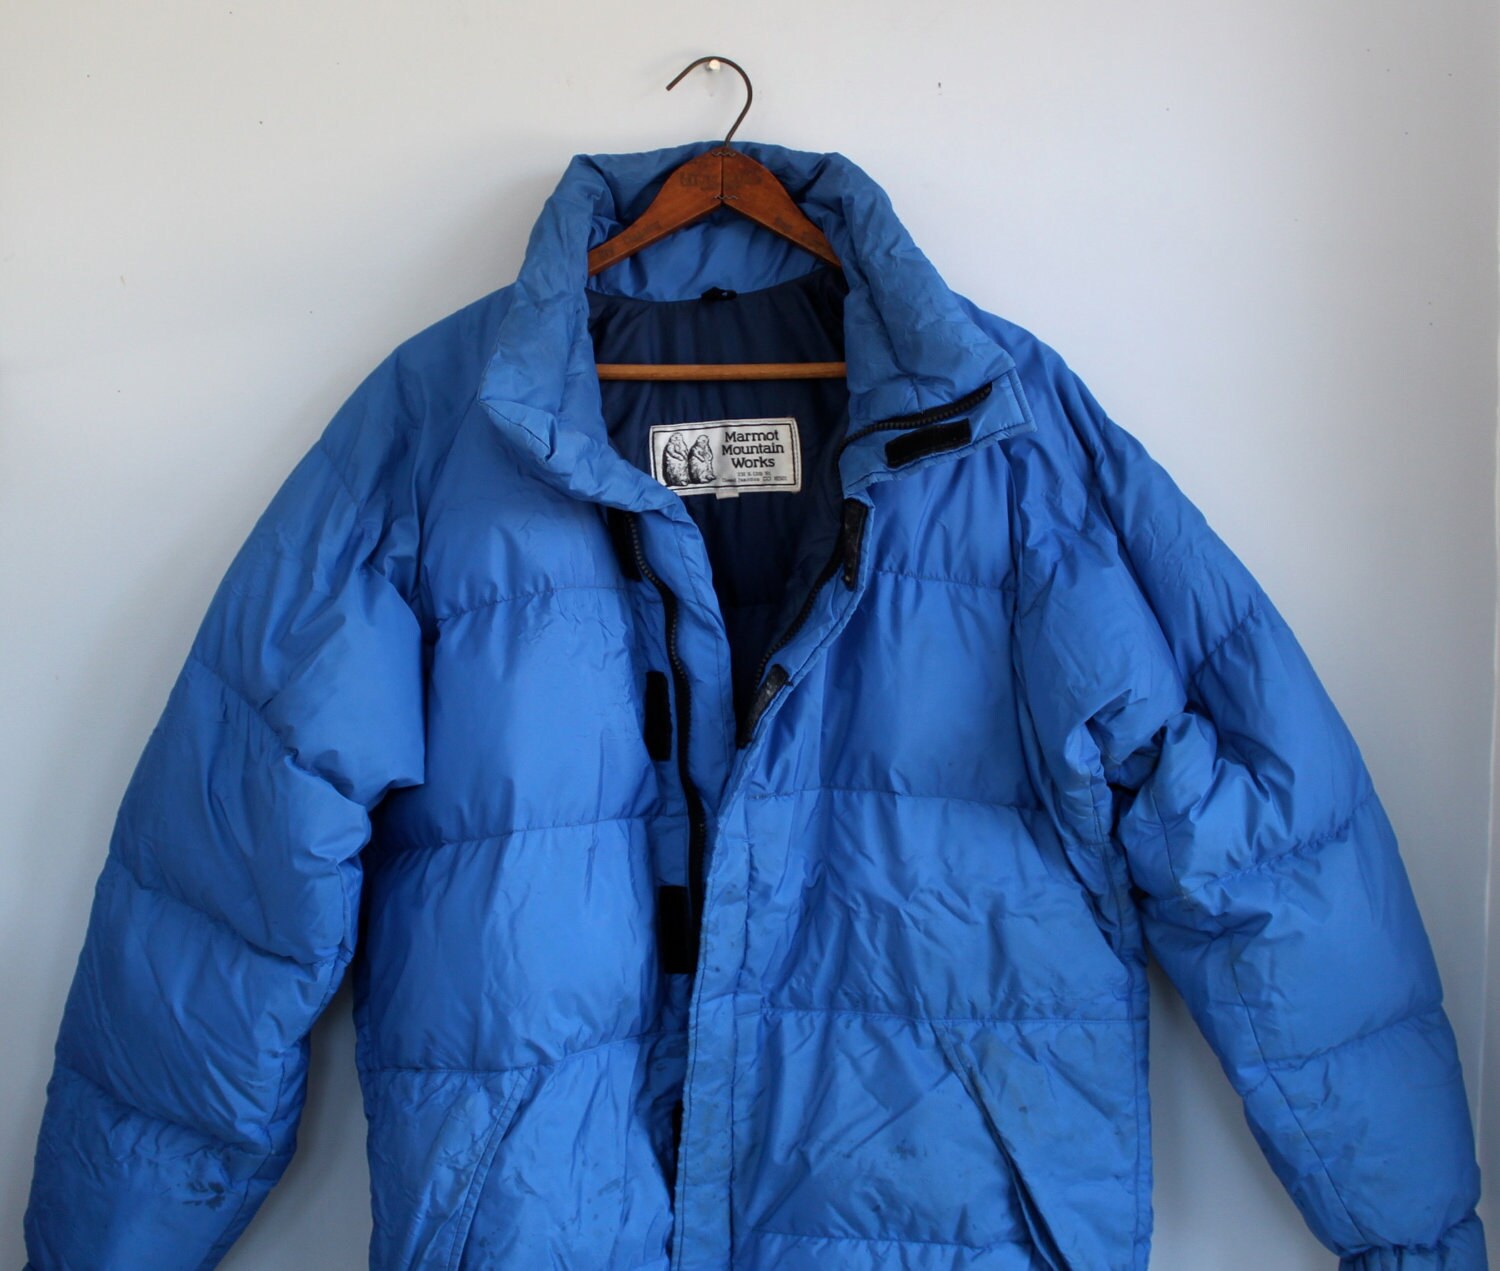 SALE vintage blue down jacket. 1970s Marmot by Luncheonettevintage